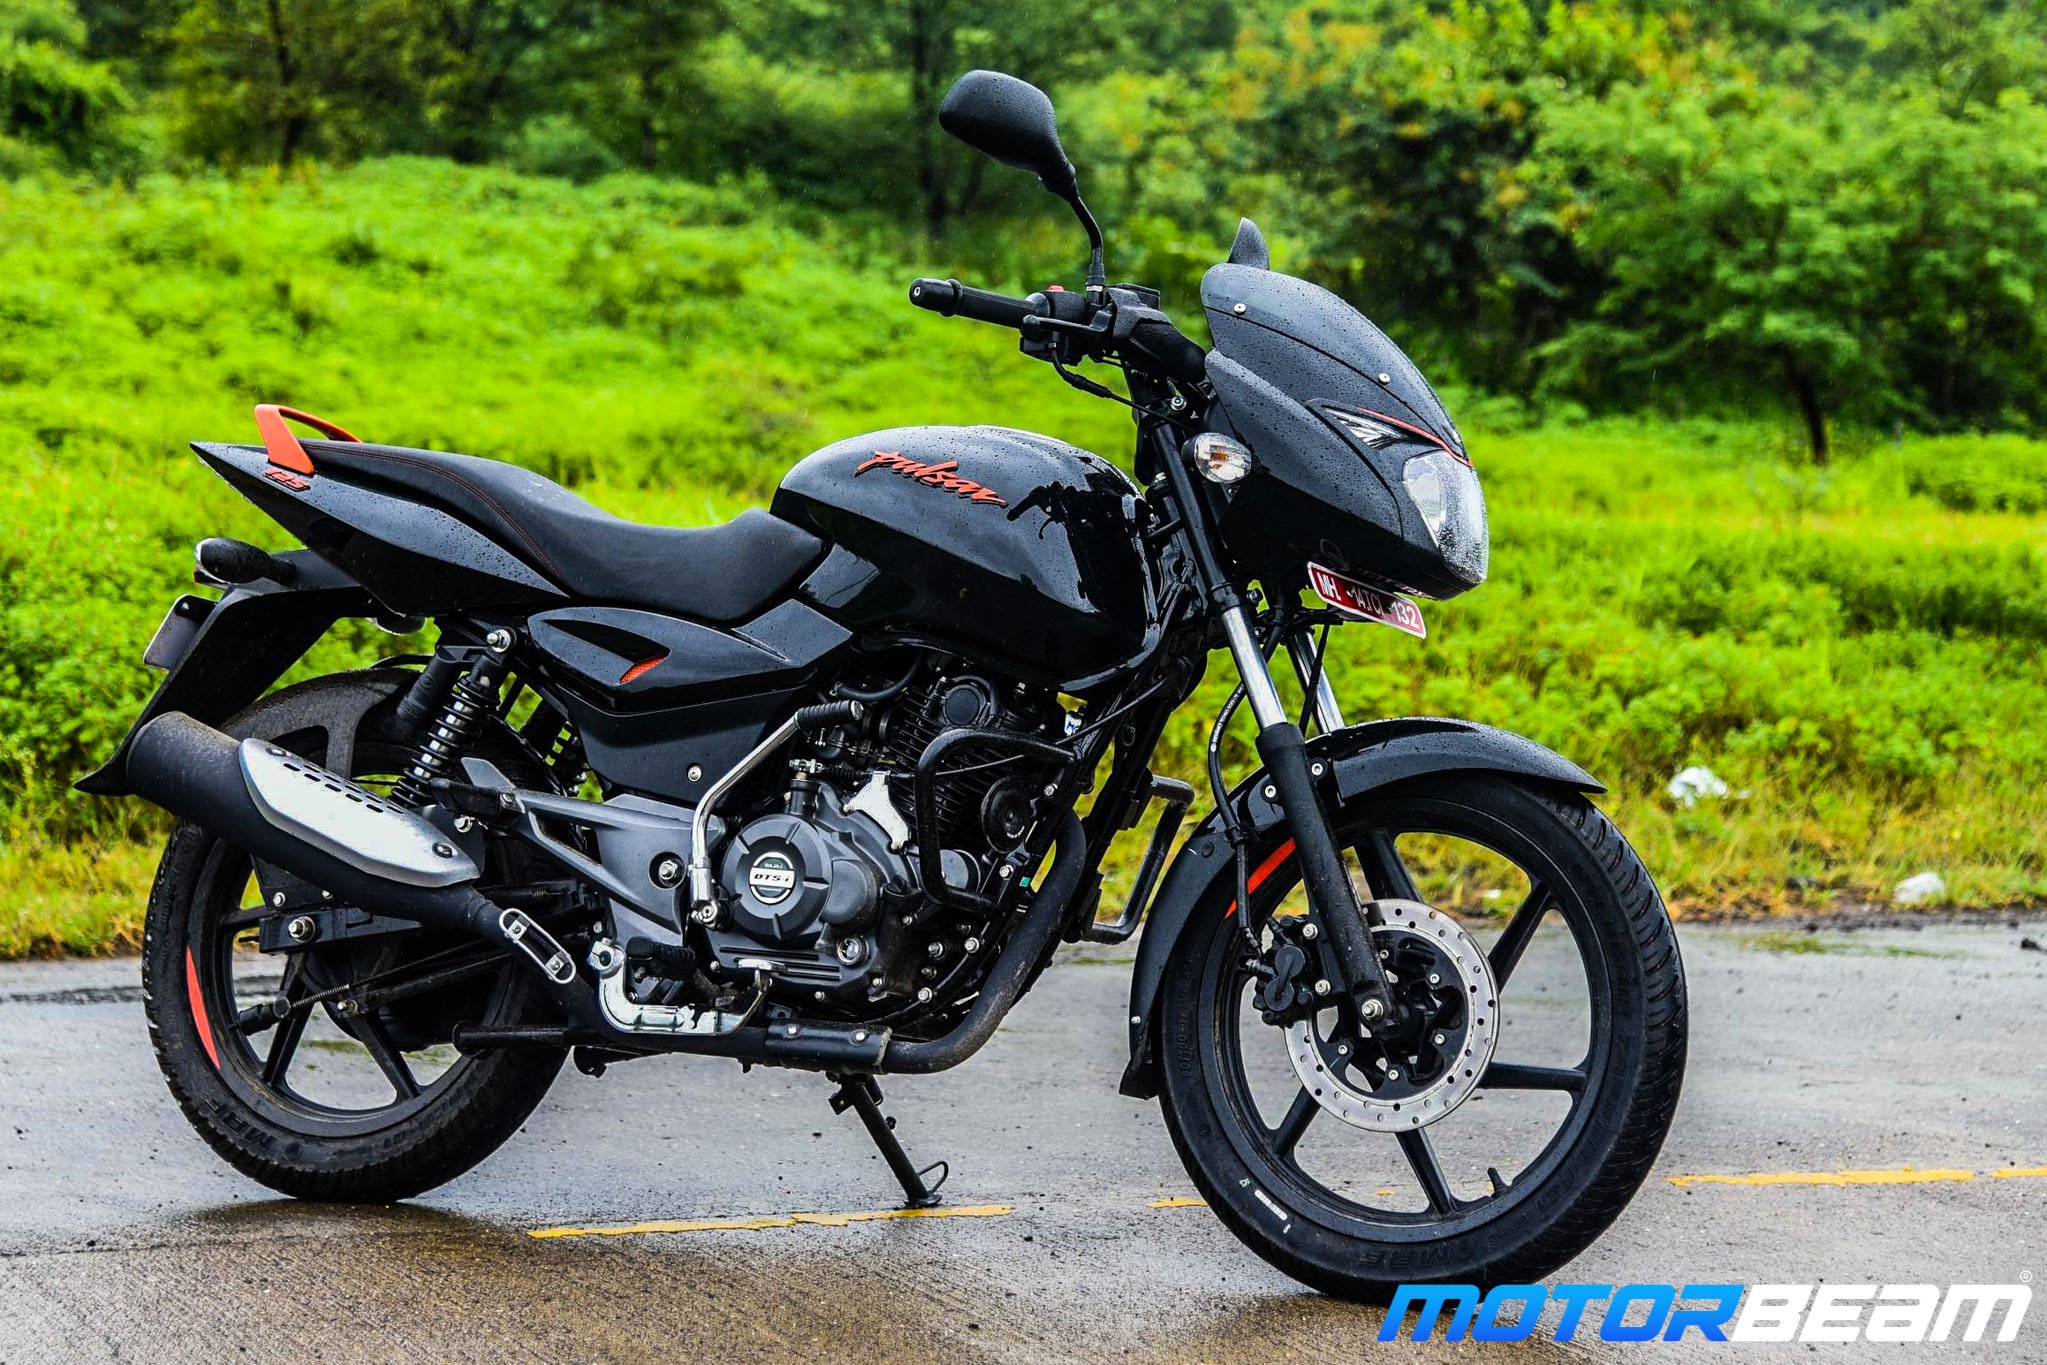 pulsar 125 bs6 on road price